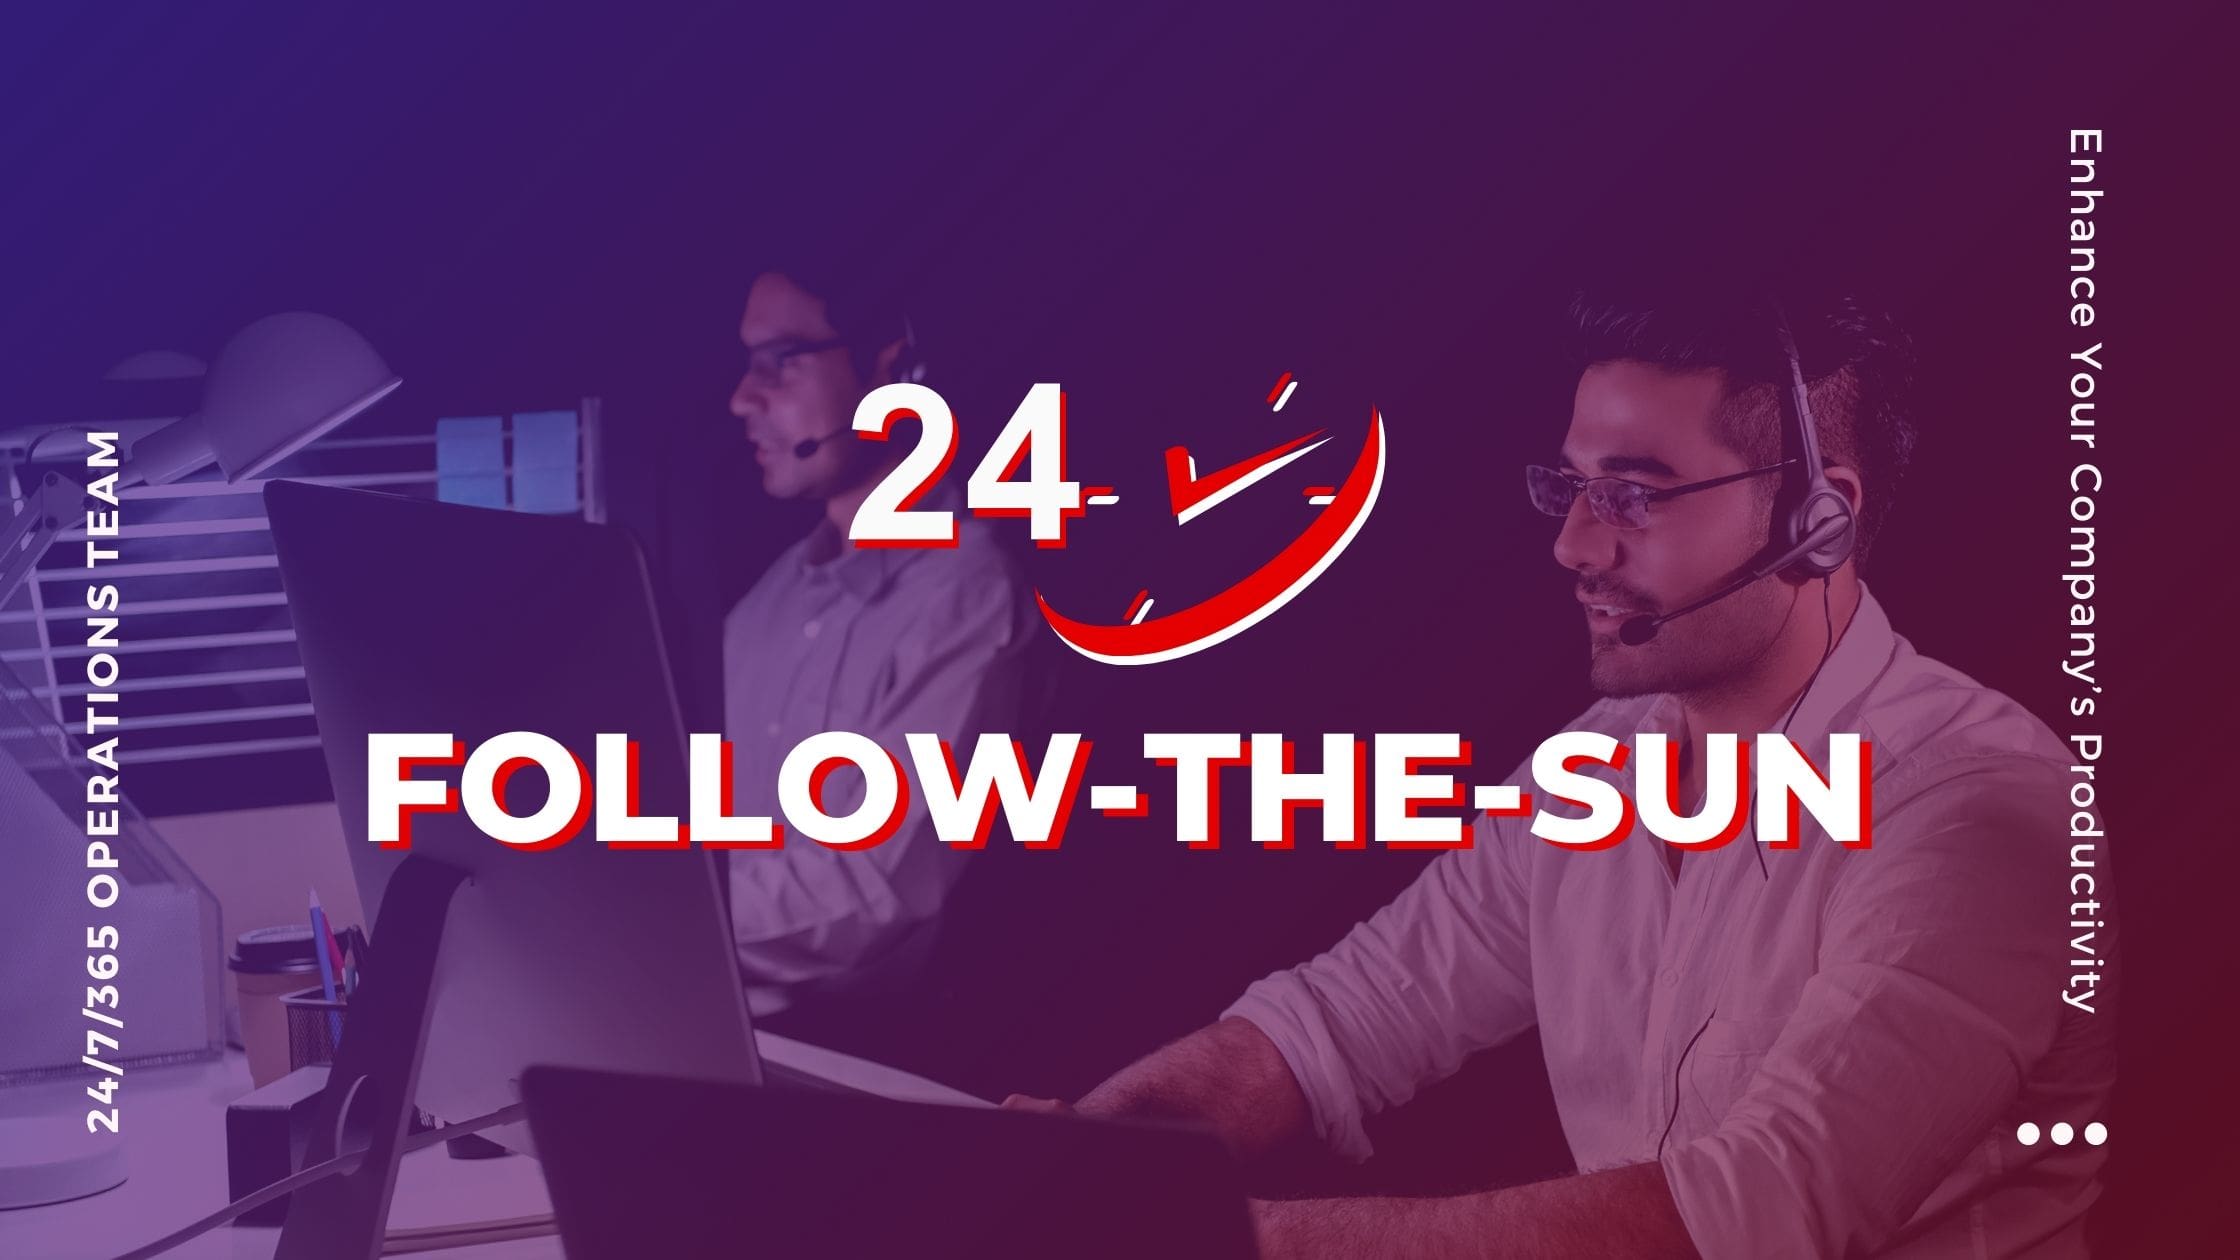 follow the sun, a type of global workflow in which issues can be handled by and passed between offices in different time zones, increasing responsiveness and reducing delays.